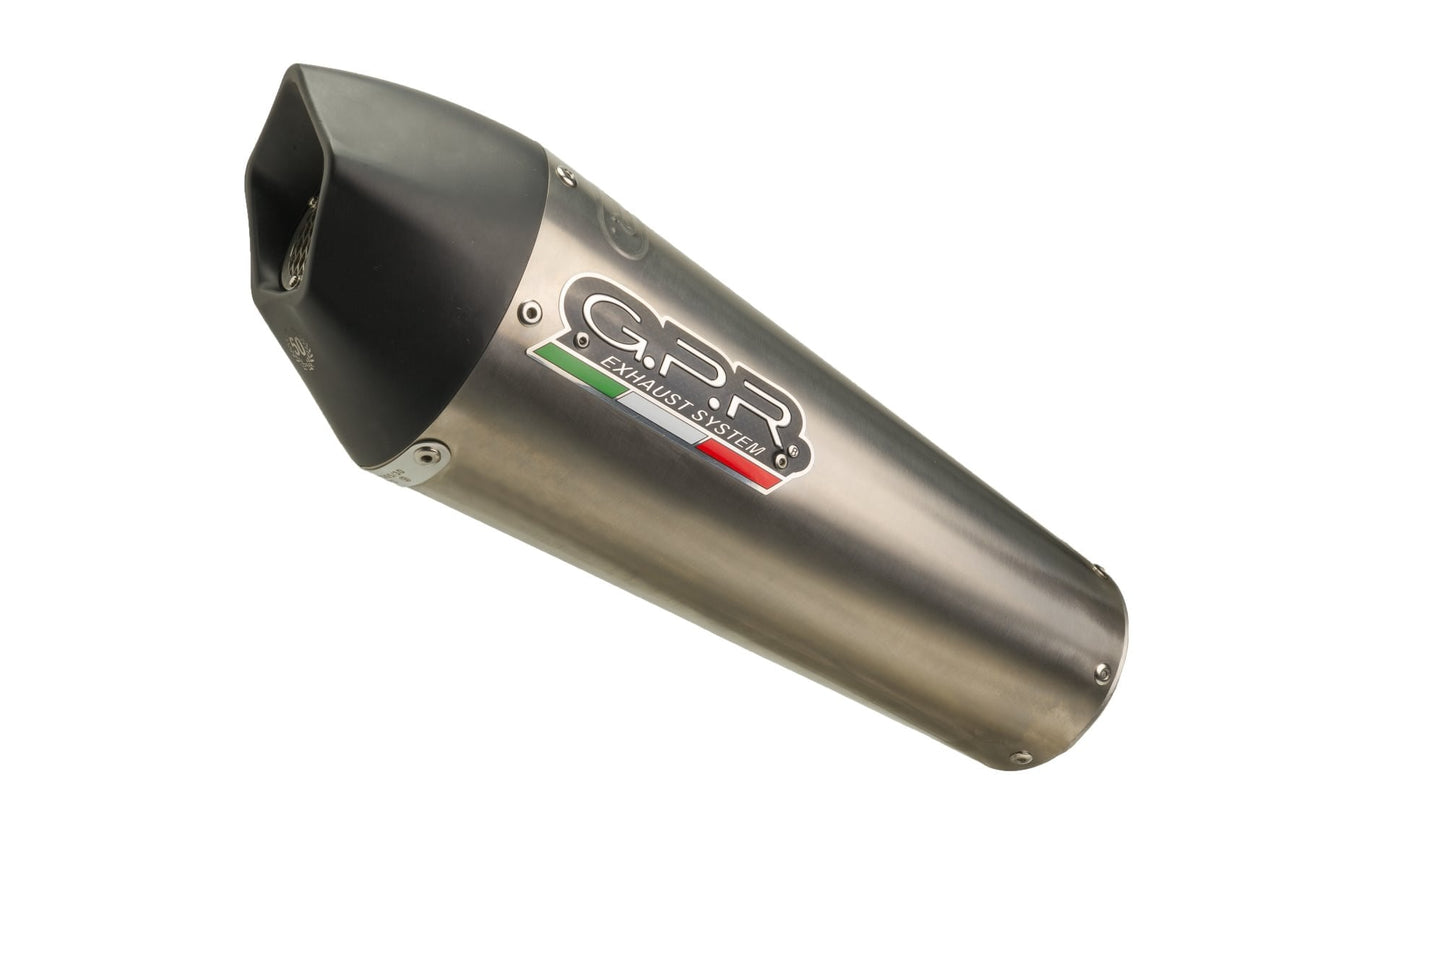 GPR Exhaust System Yamaha XSR900 2021-2023, Gpe Ann. titanium, Full System Exhaust, Including Removable DB Killer  E5.CO.Y.222.DBHOM.GPAN.TO